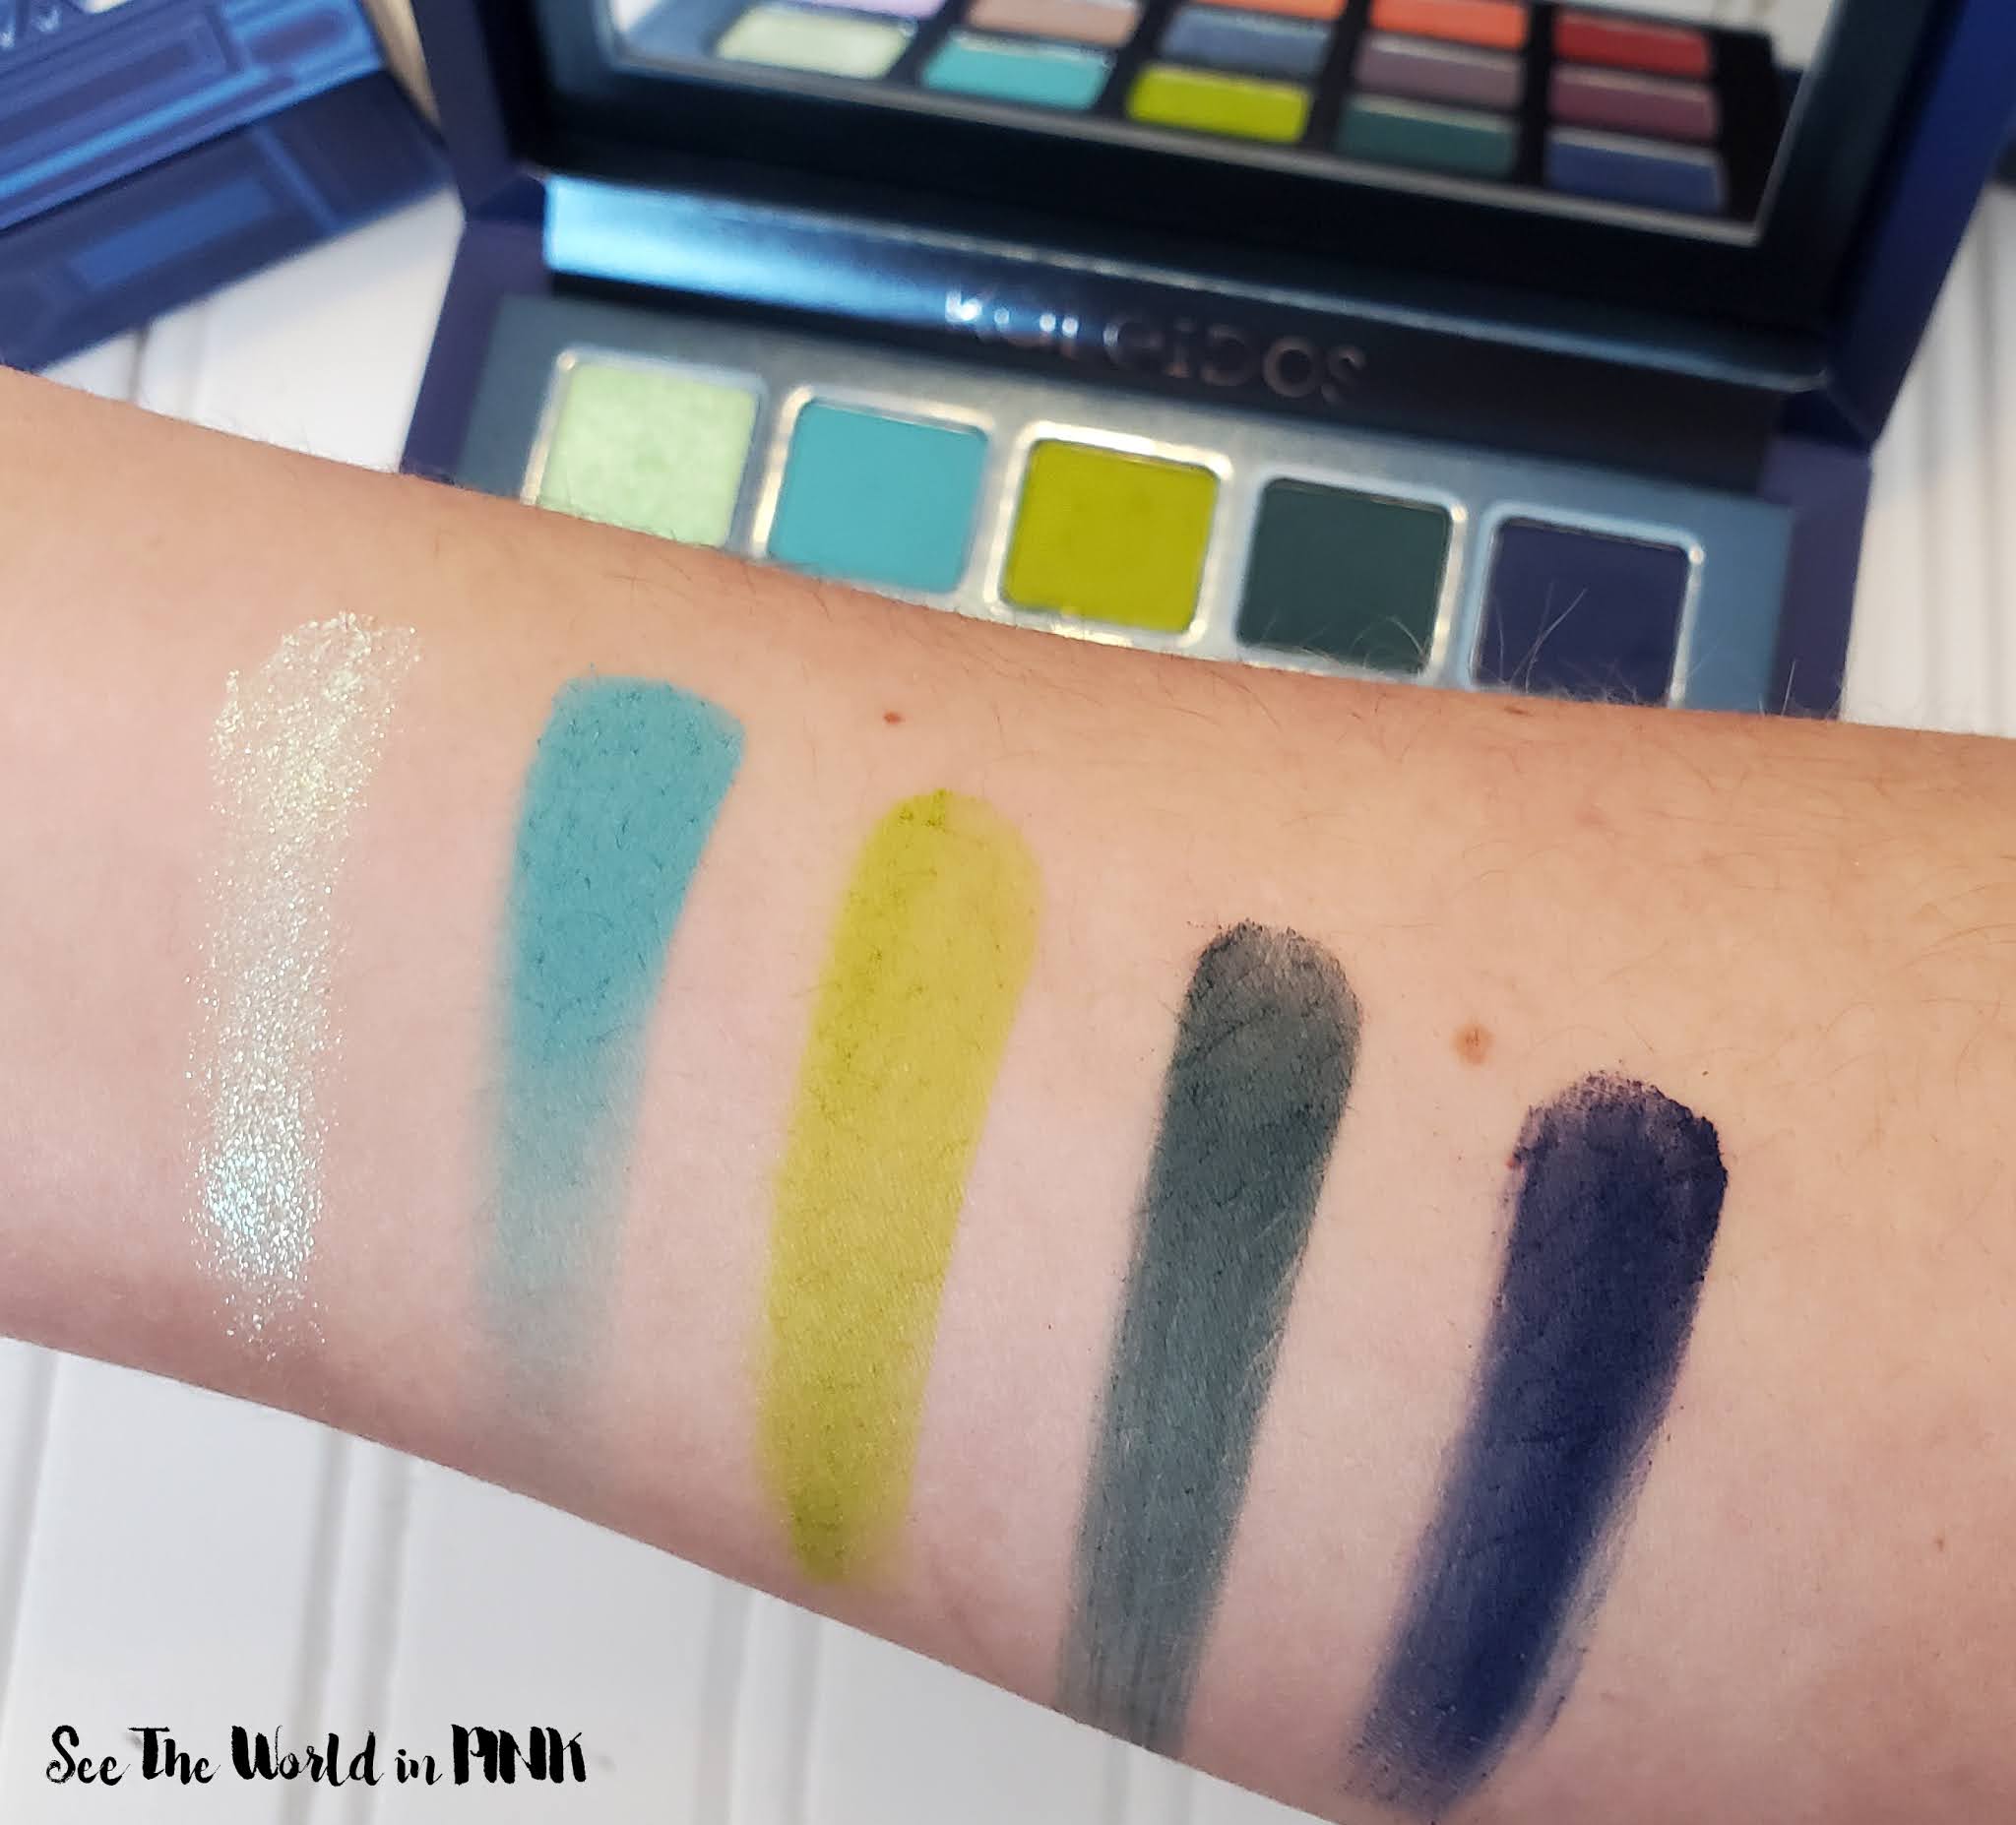 Kaleidos x Angelica Nyqvist The Club Nebula Eyeshadow Palette - Swatches, Looks and Thoughts!